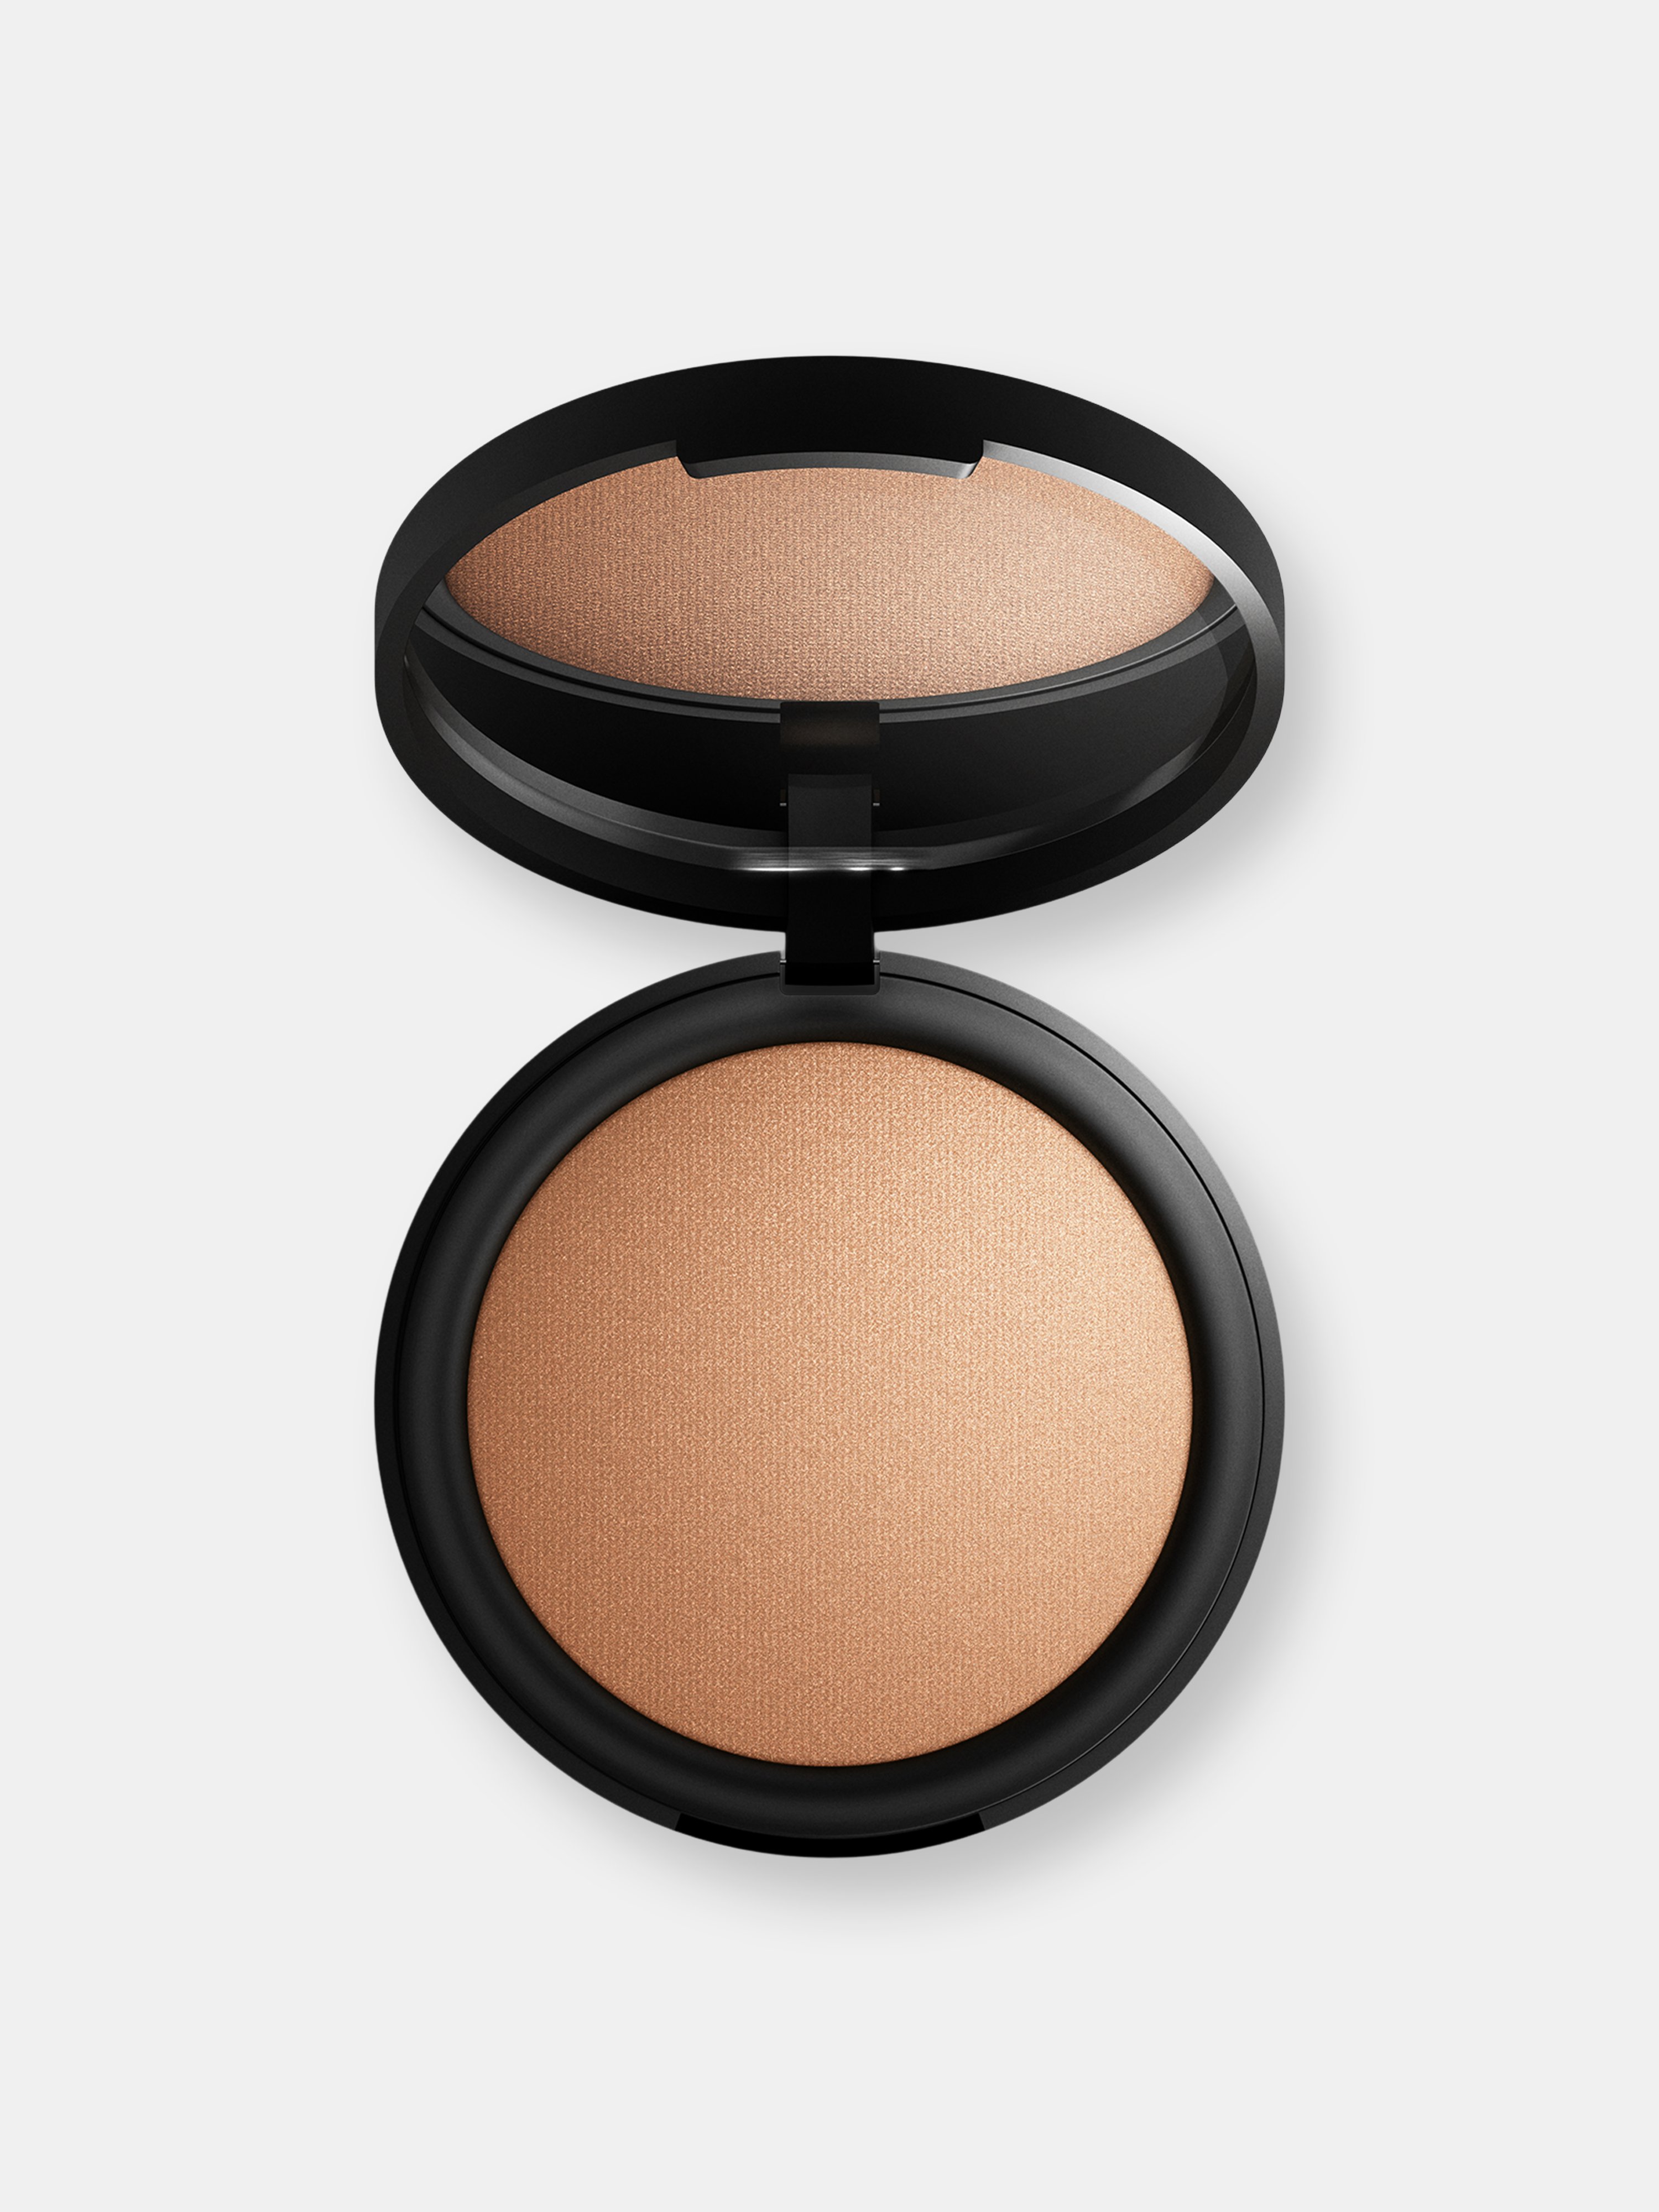 Inika Organic Baked Mineral Bronzer (sunkissed)